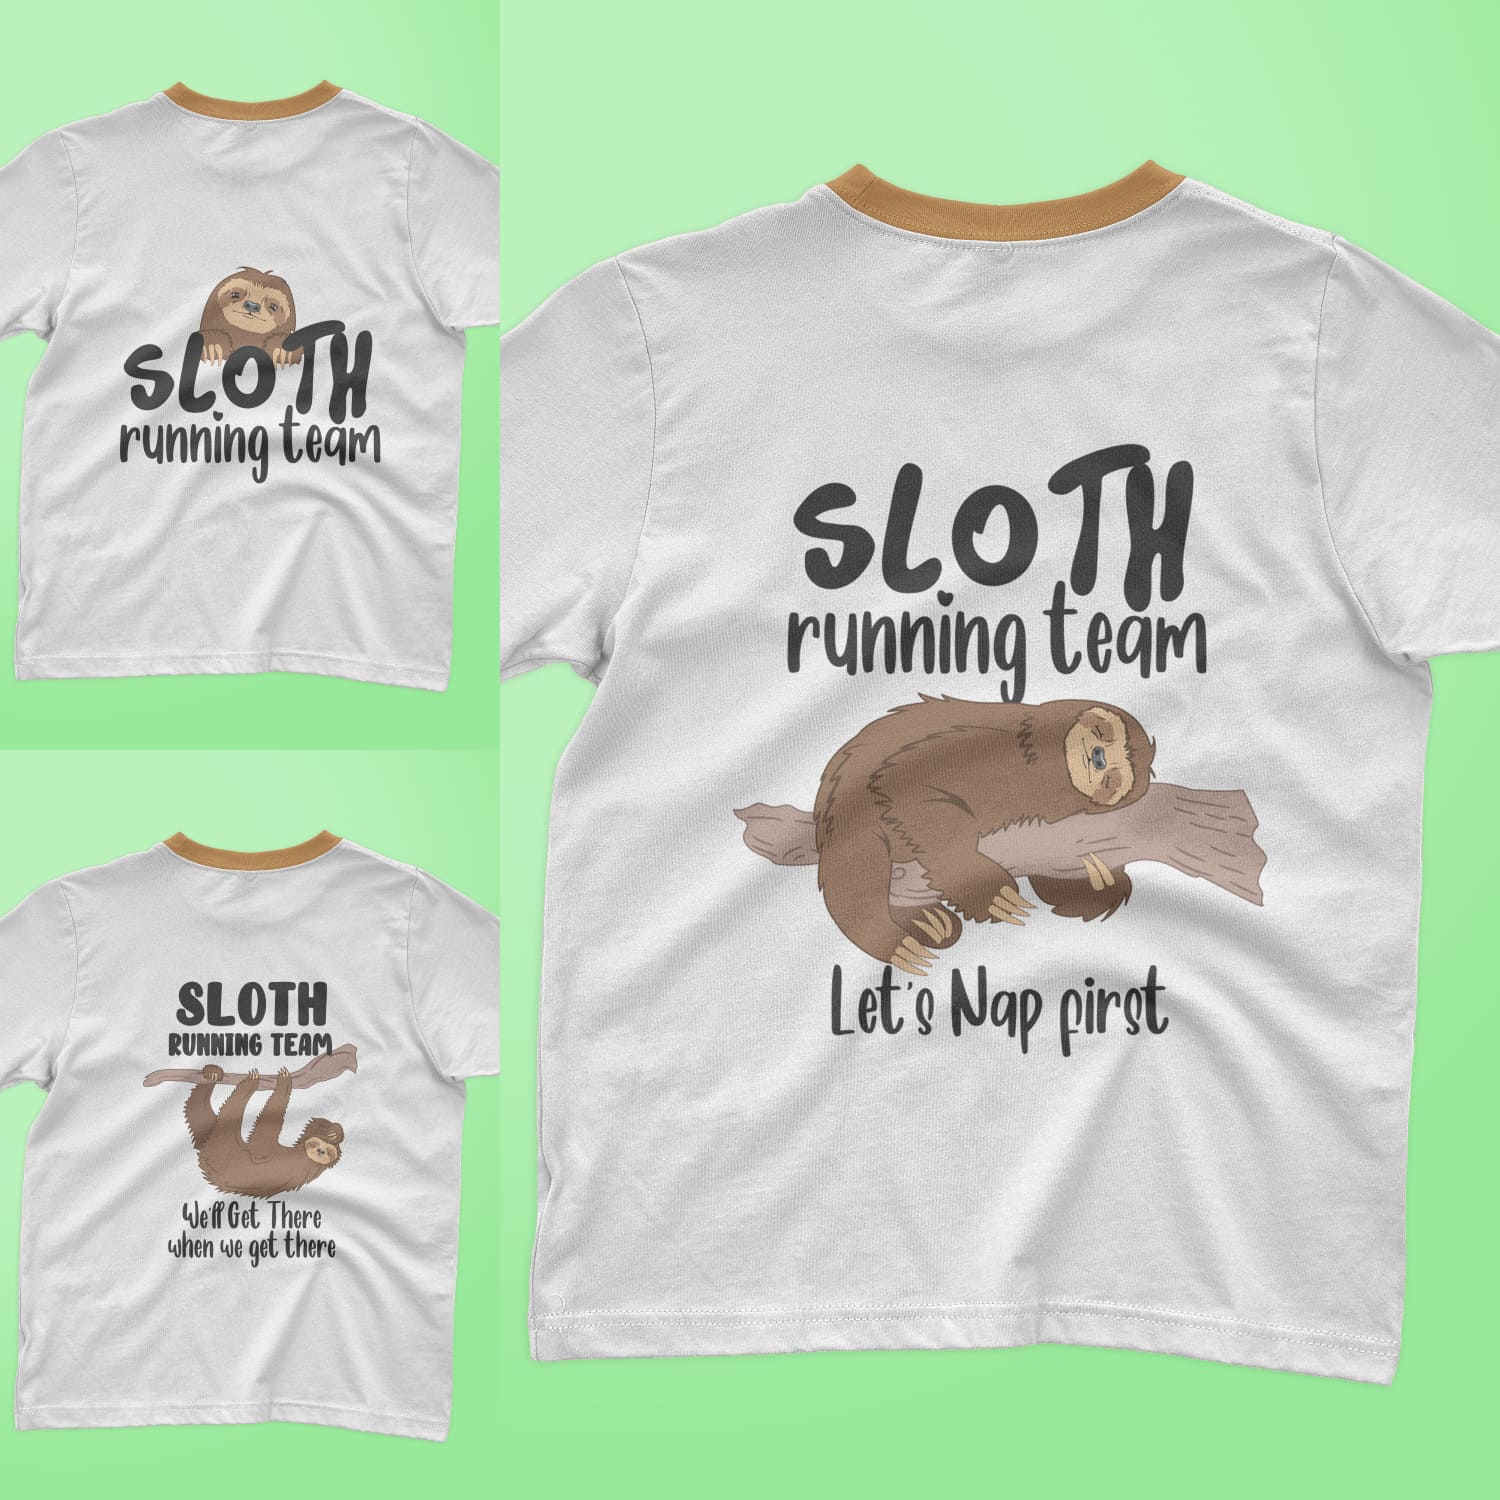 A set of t-shirts with enchanting prints of sloths with slogans "running team".